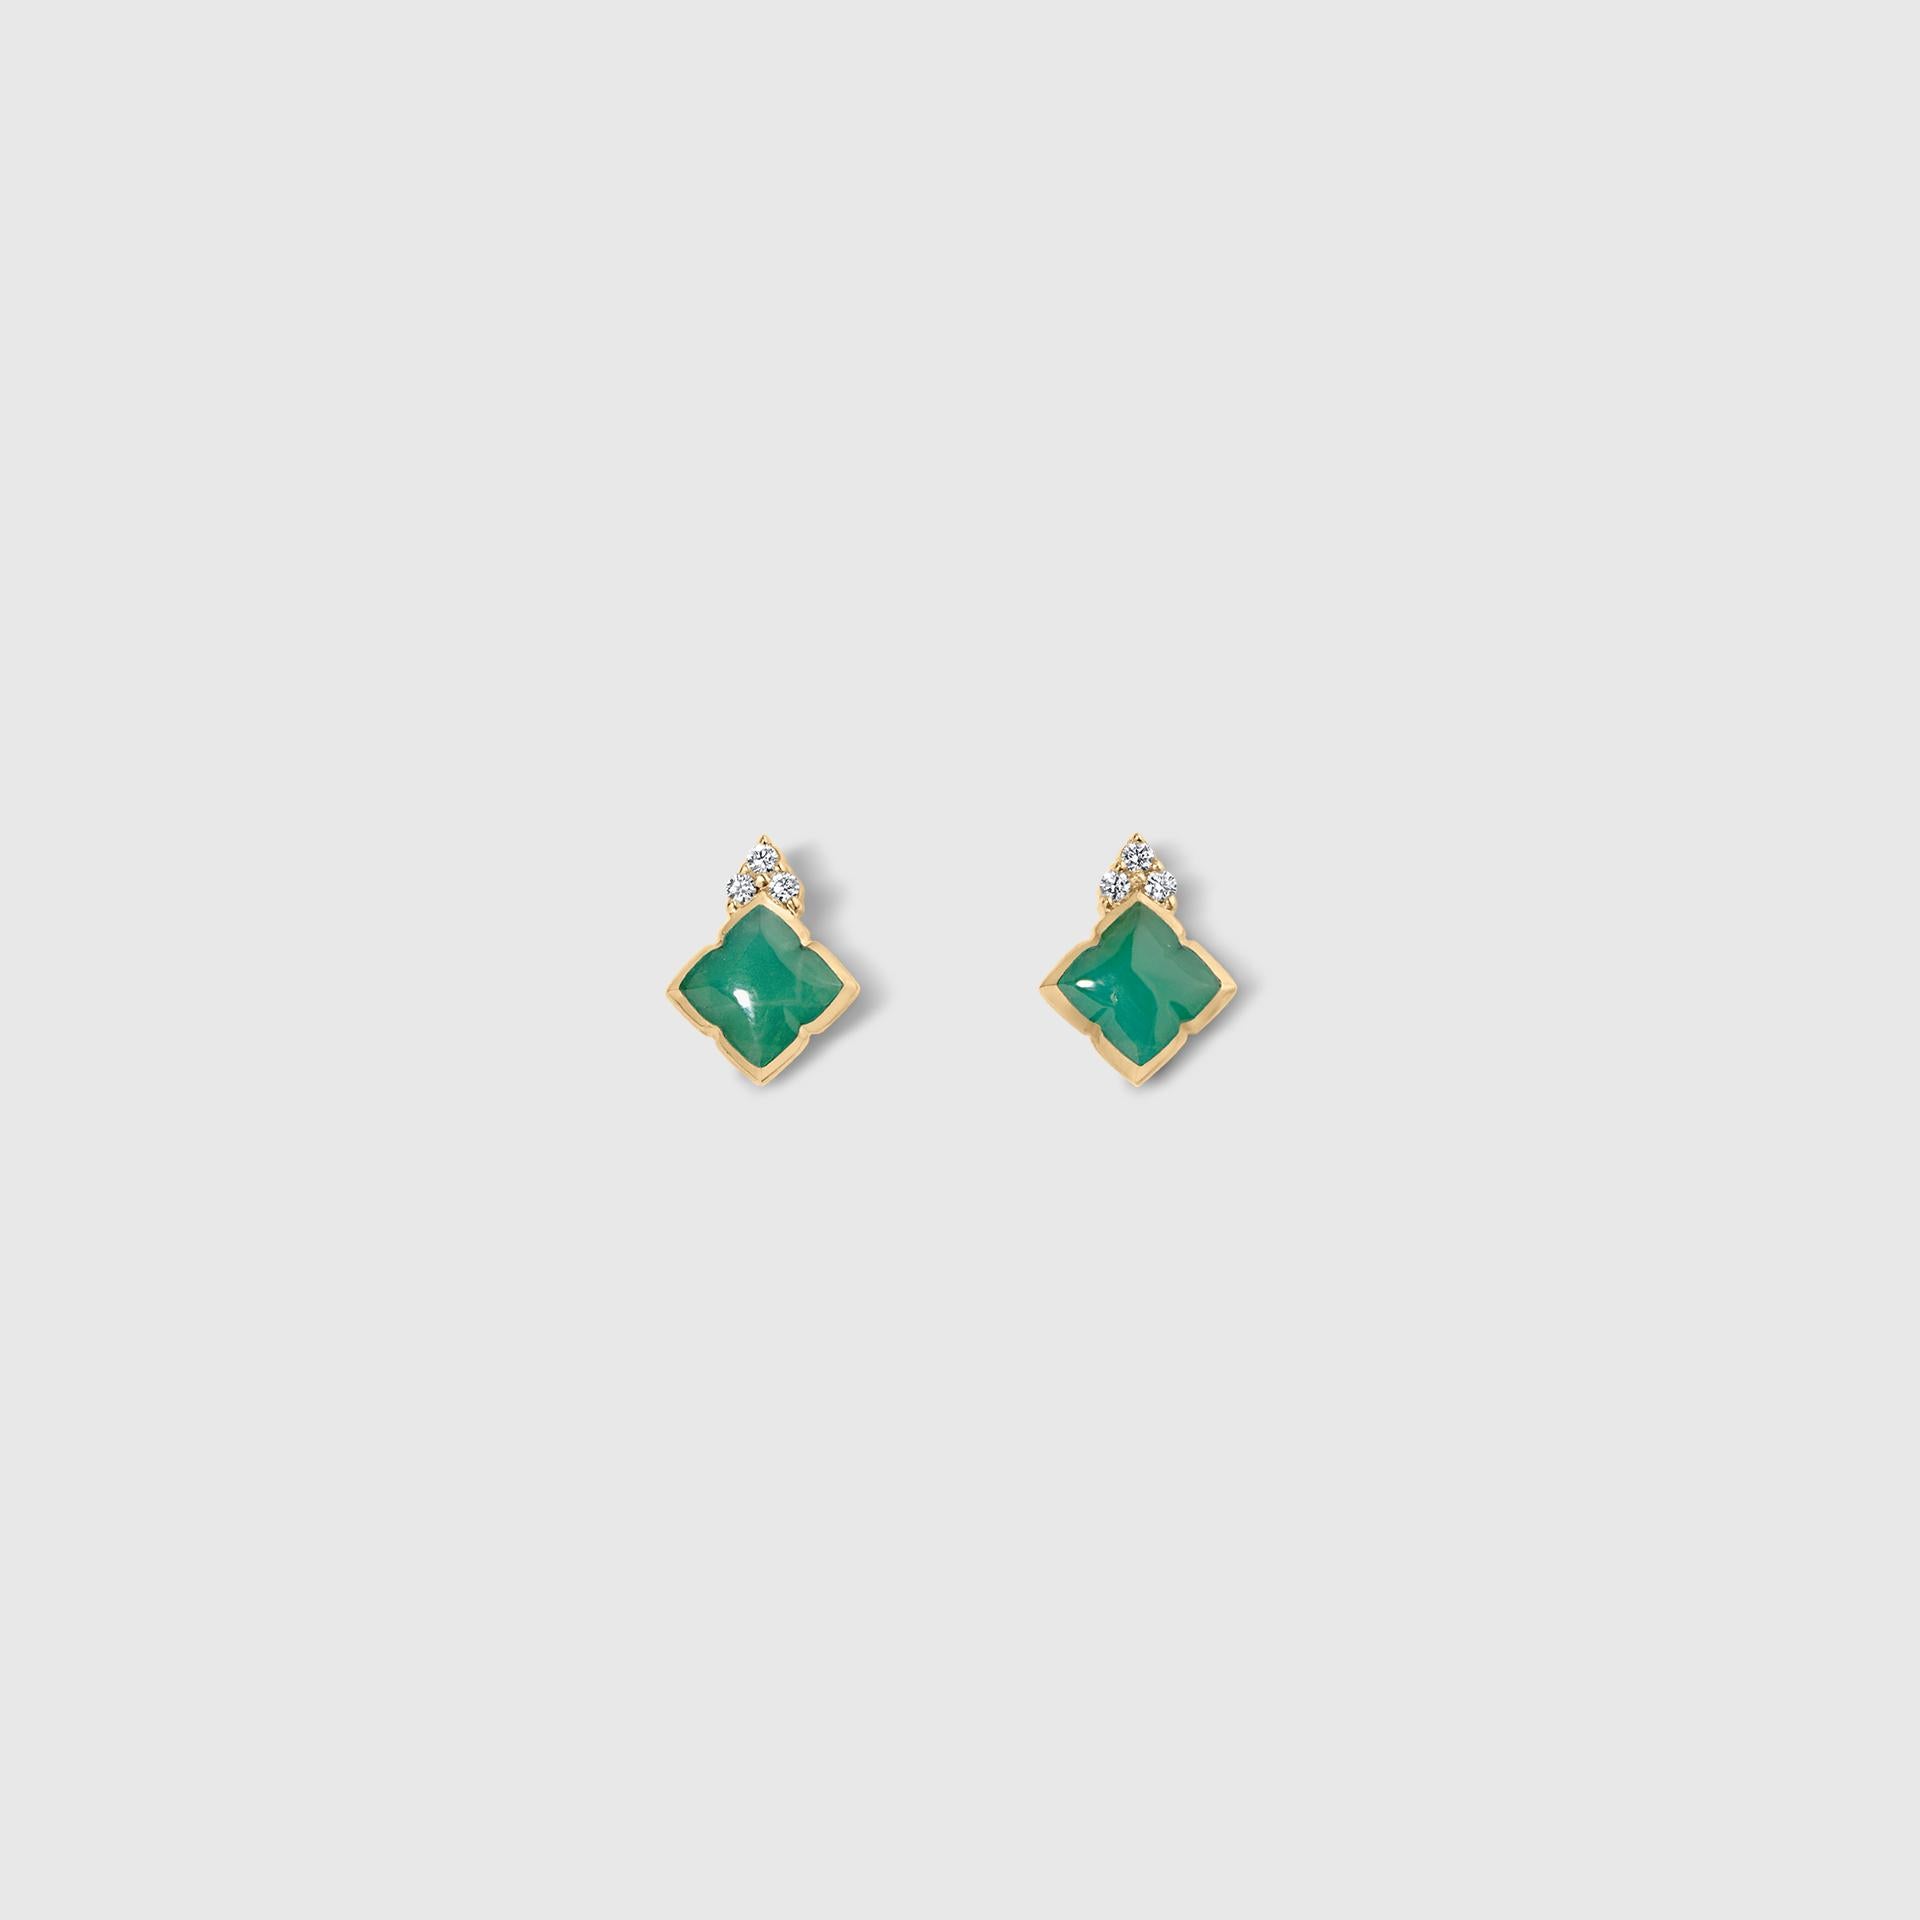 Green Chrysoprase Inlay Post Earrings with Diamonds, 14 Karat Gold by Kabana In New Condition For Sale In Bozeman, MT